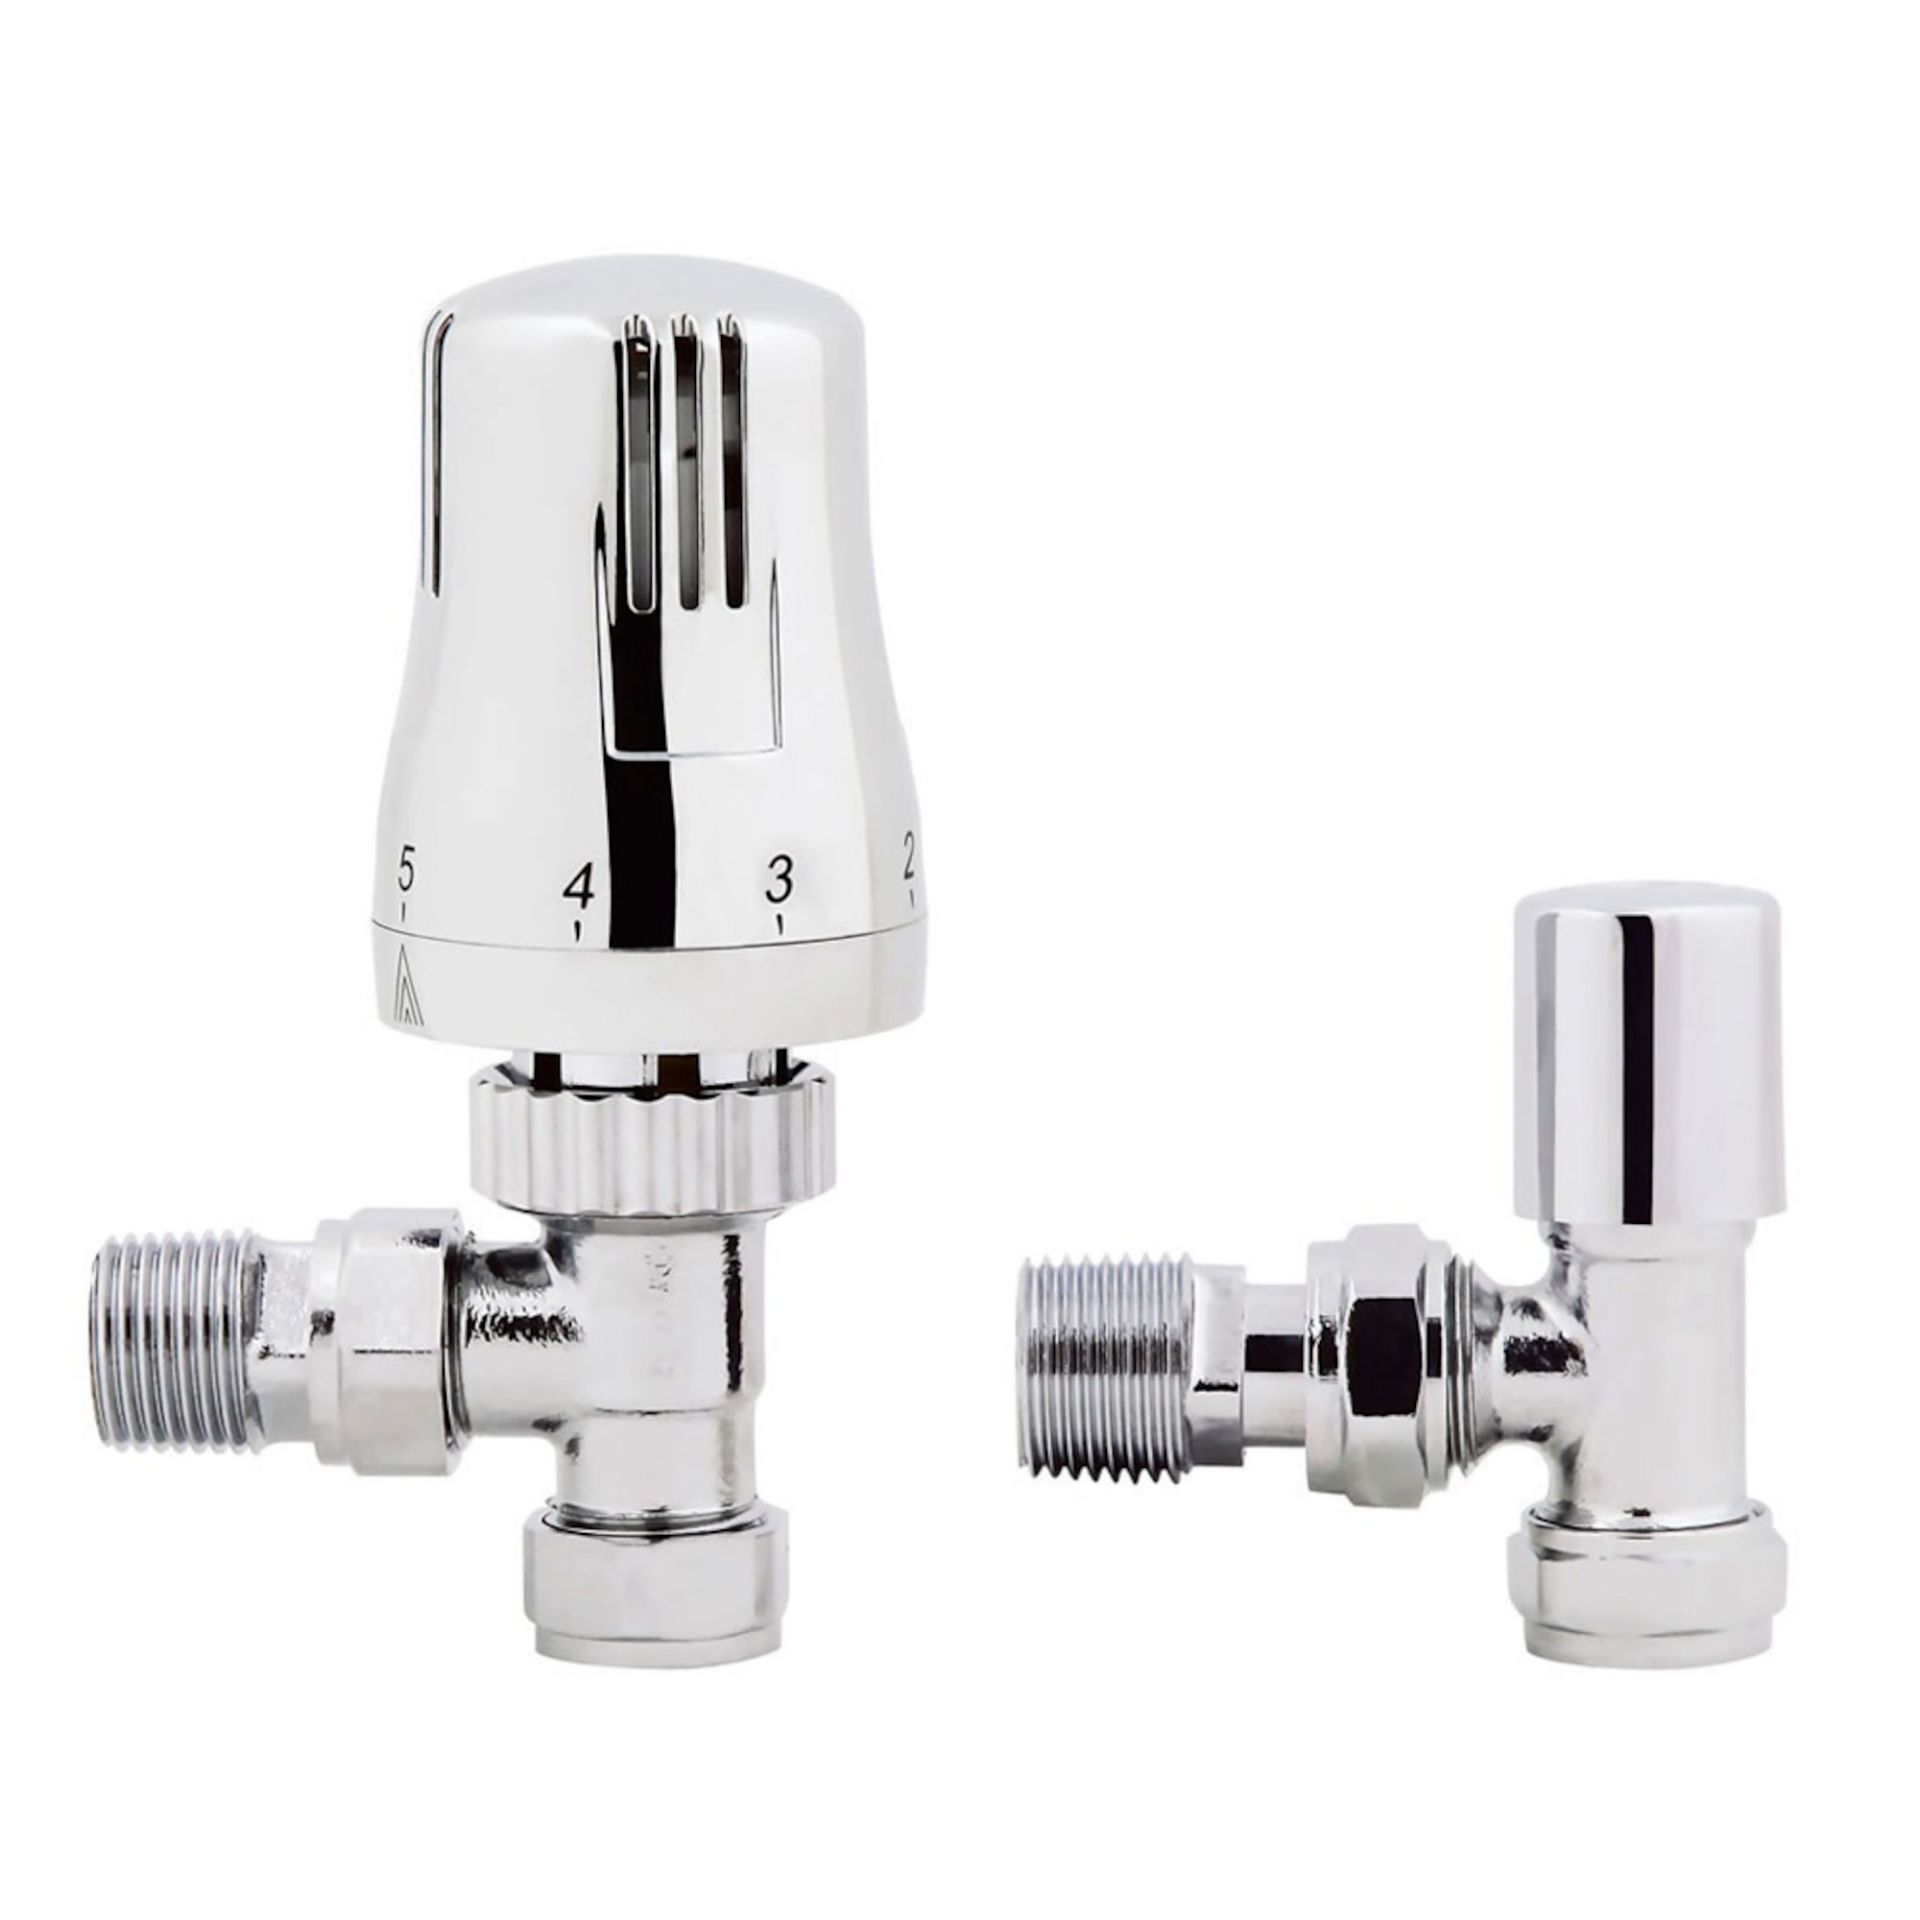 (NV1012) 15mm Standard Connection Thermostatic Angled Chrome Radiator Valves Chrome Plated Sol... - Image 2 of 3